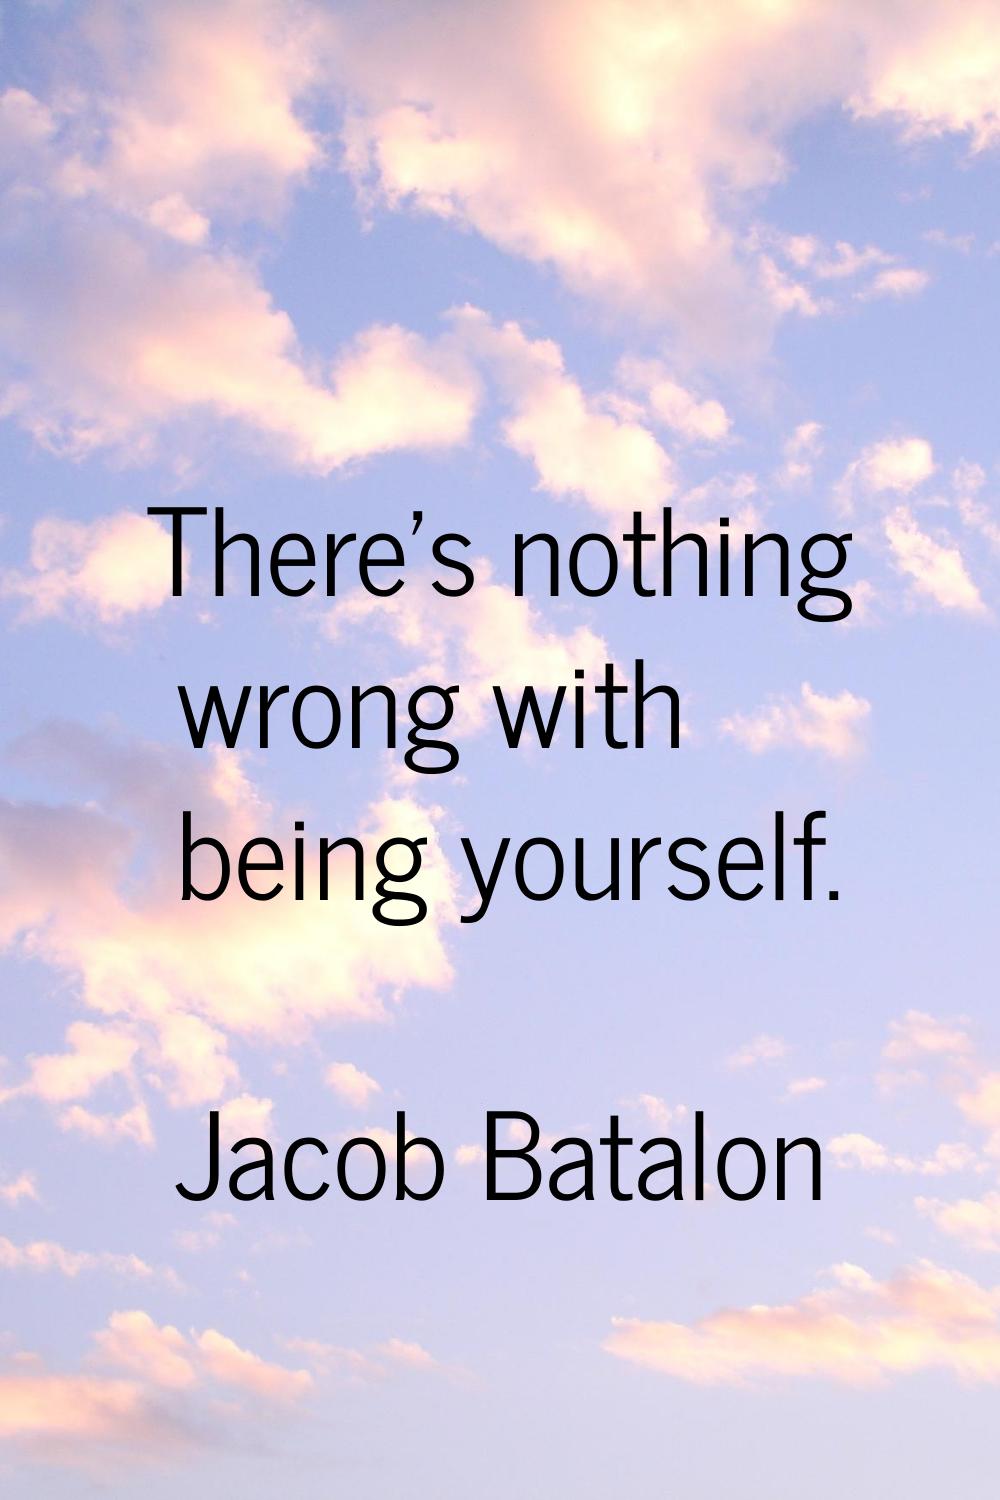 There's nothing wrong with being yourself.